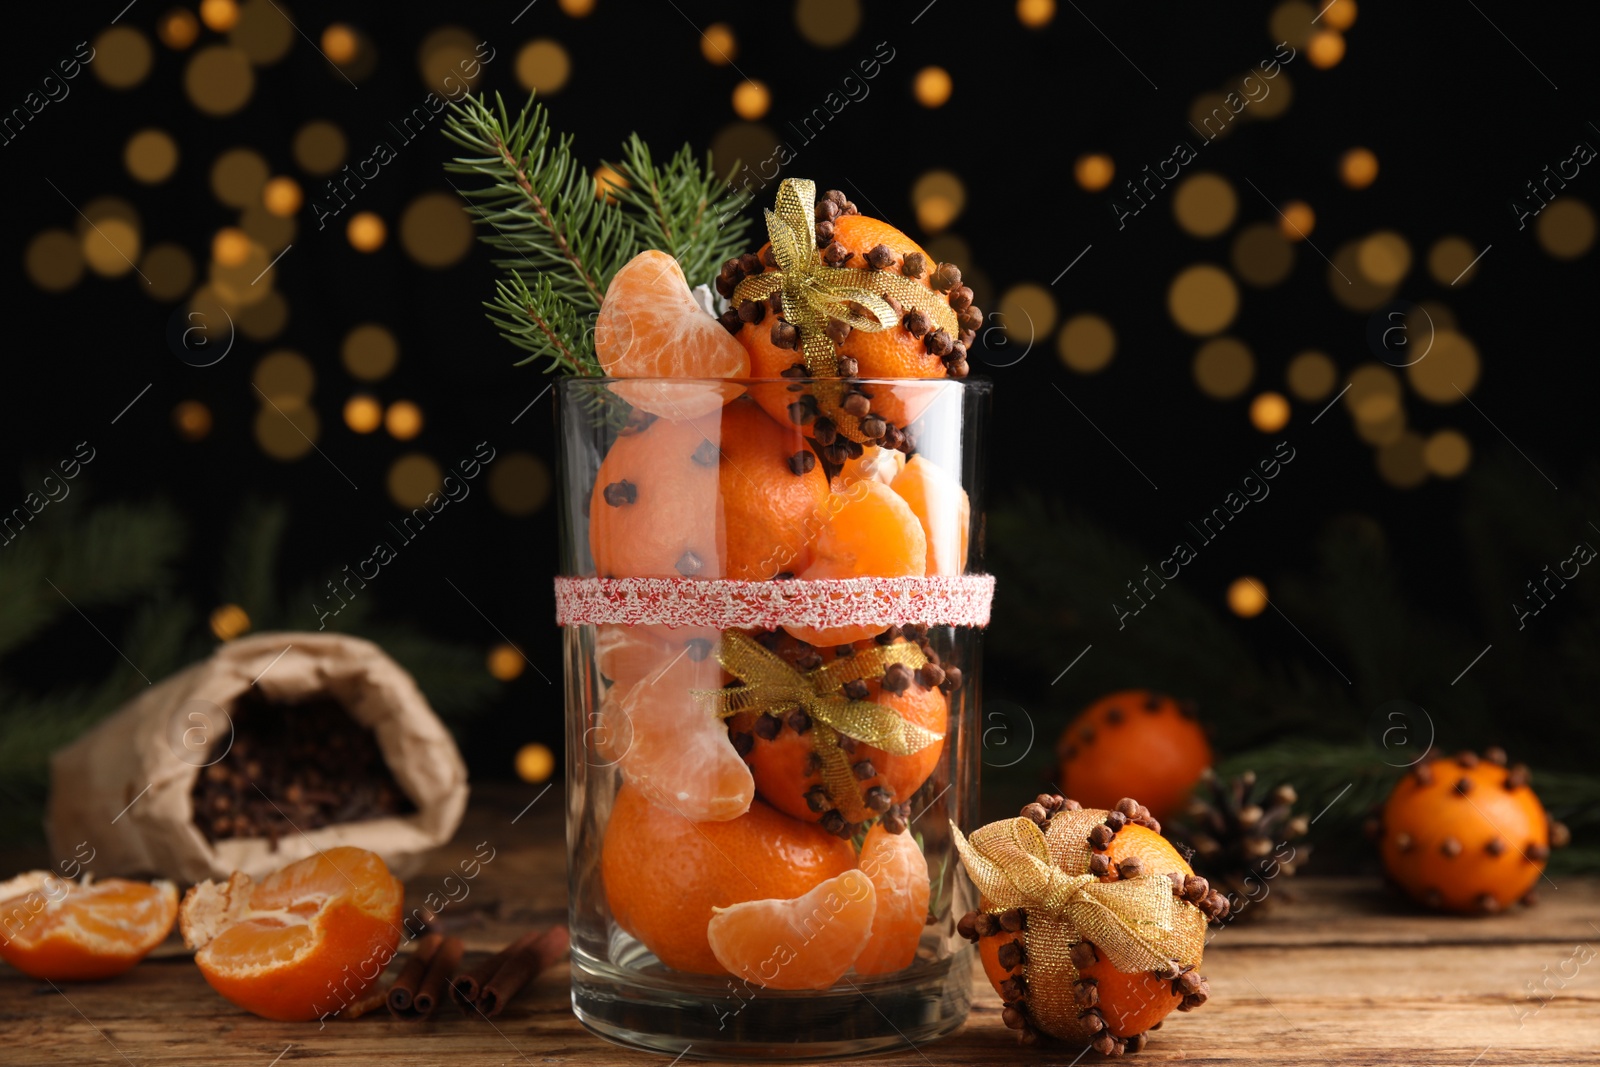 Photo of Christmas composition with tangerine pomander balls in glass against blurred lights